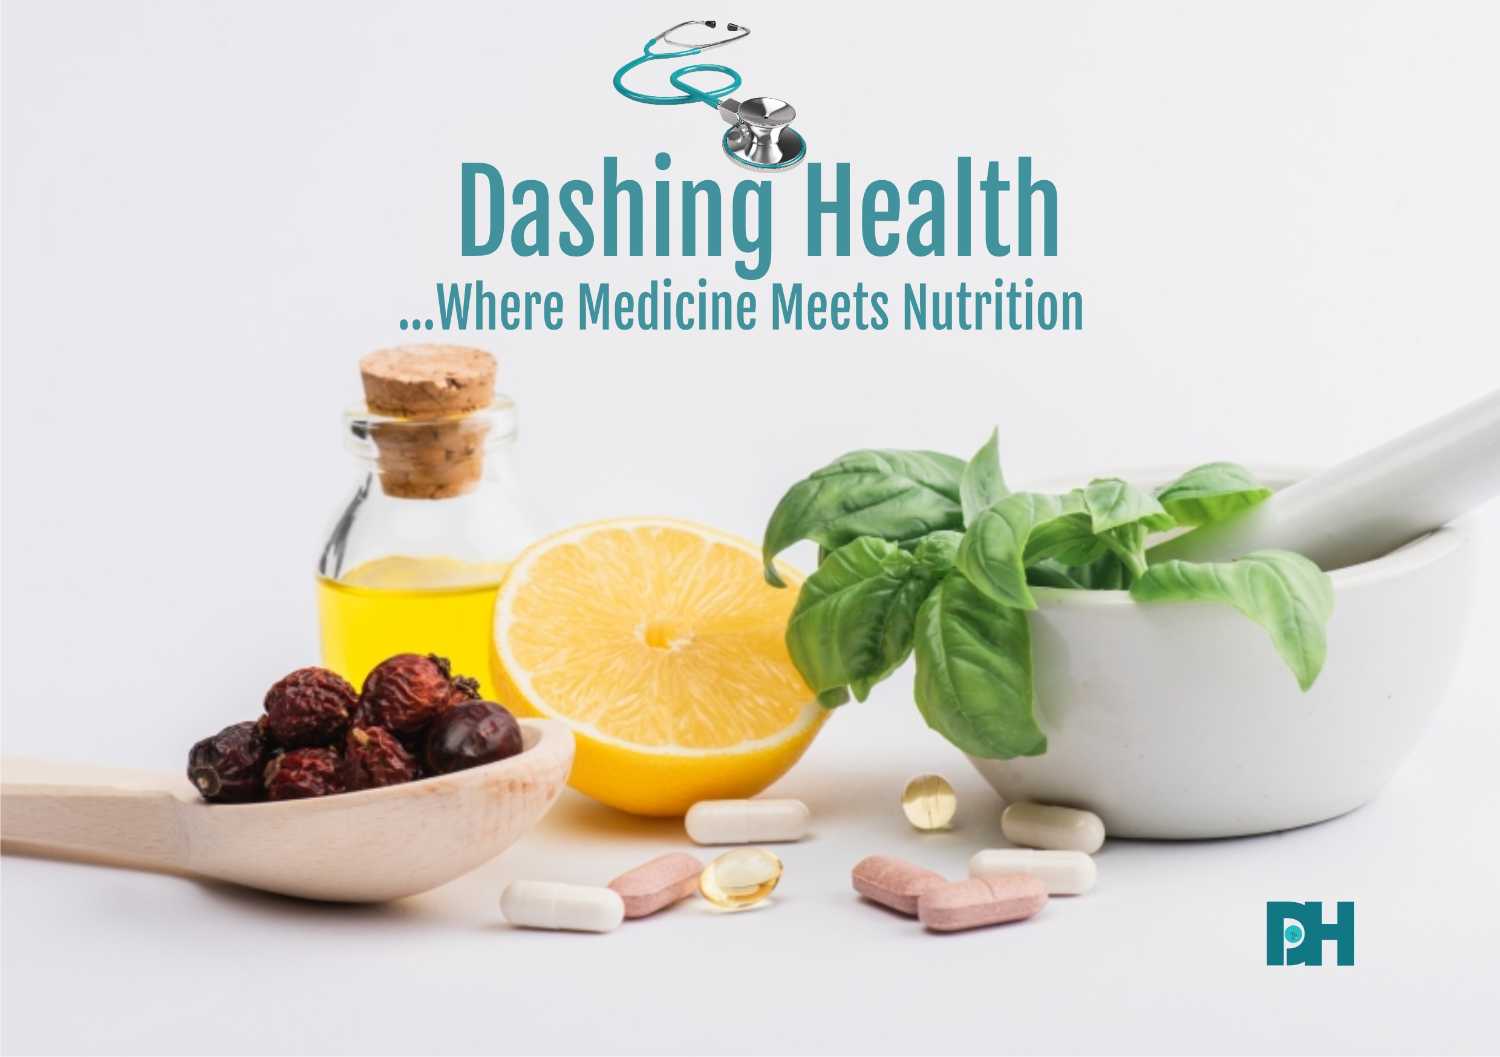 Dashing Health: Your Professional Health Guide